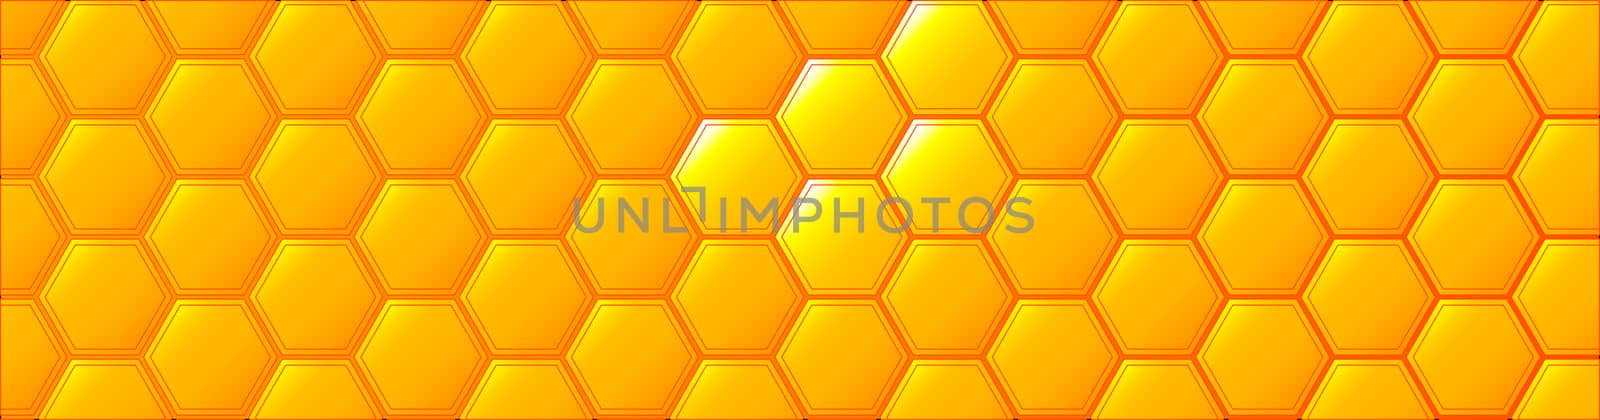 A bee honeycombe web banner formed from segments of orange